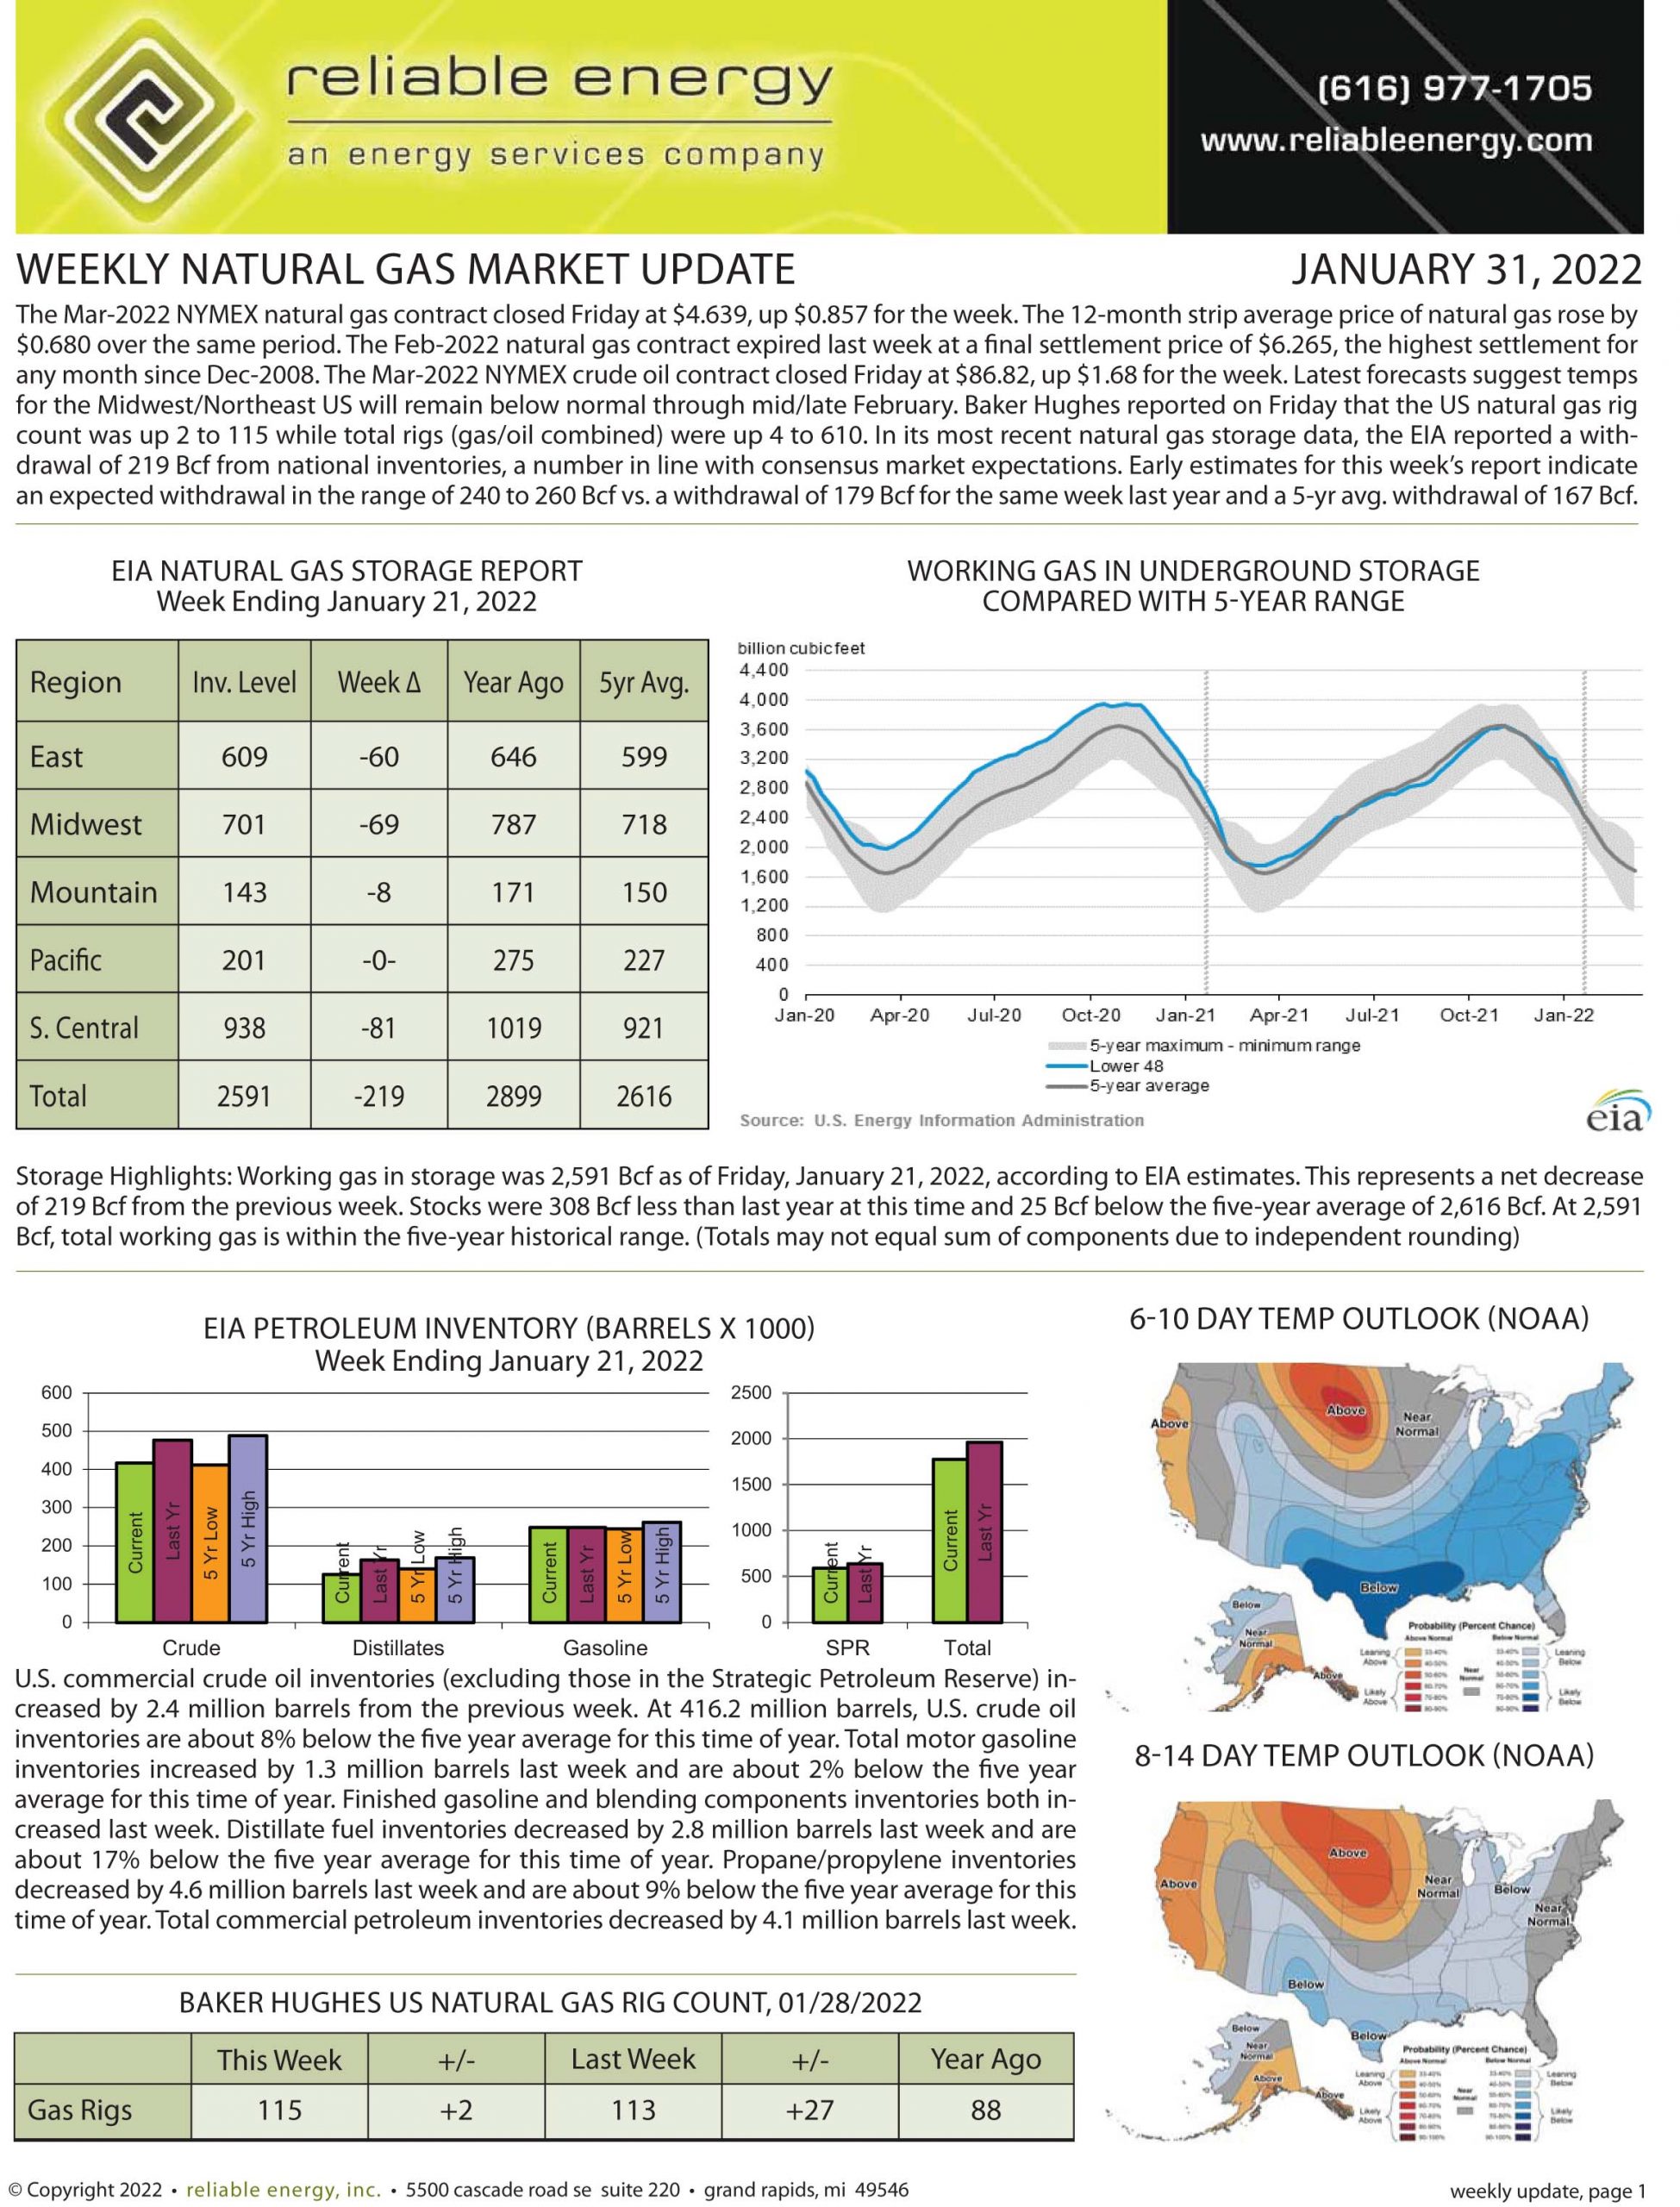 Natural Gas Market Update – January 31, 2022